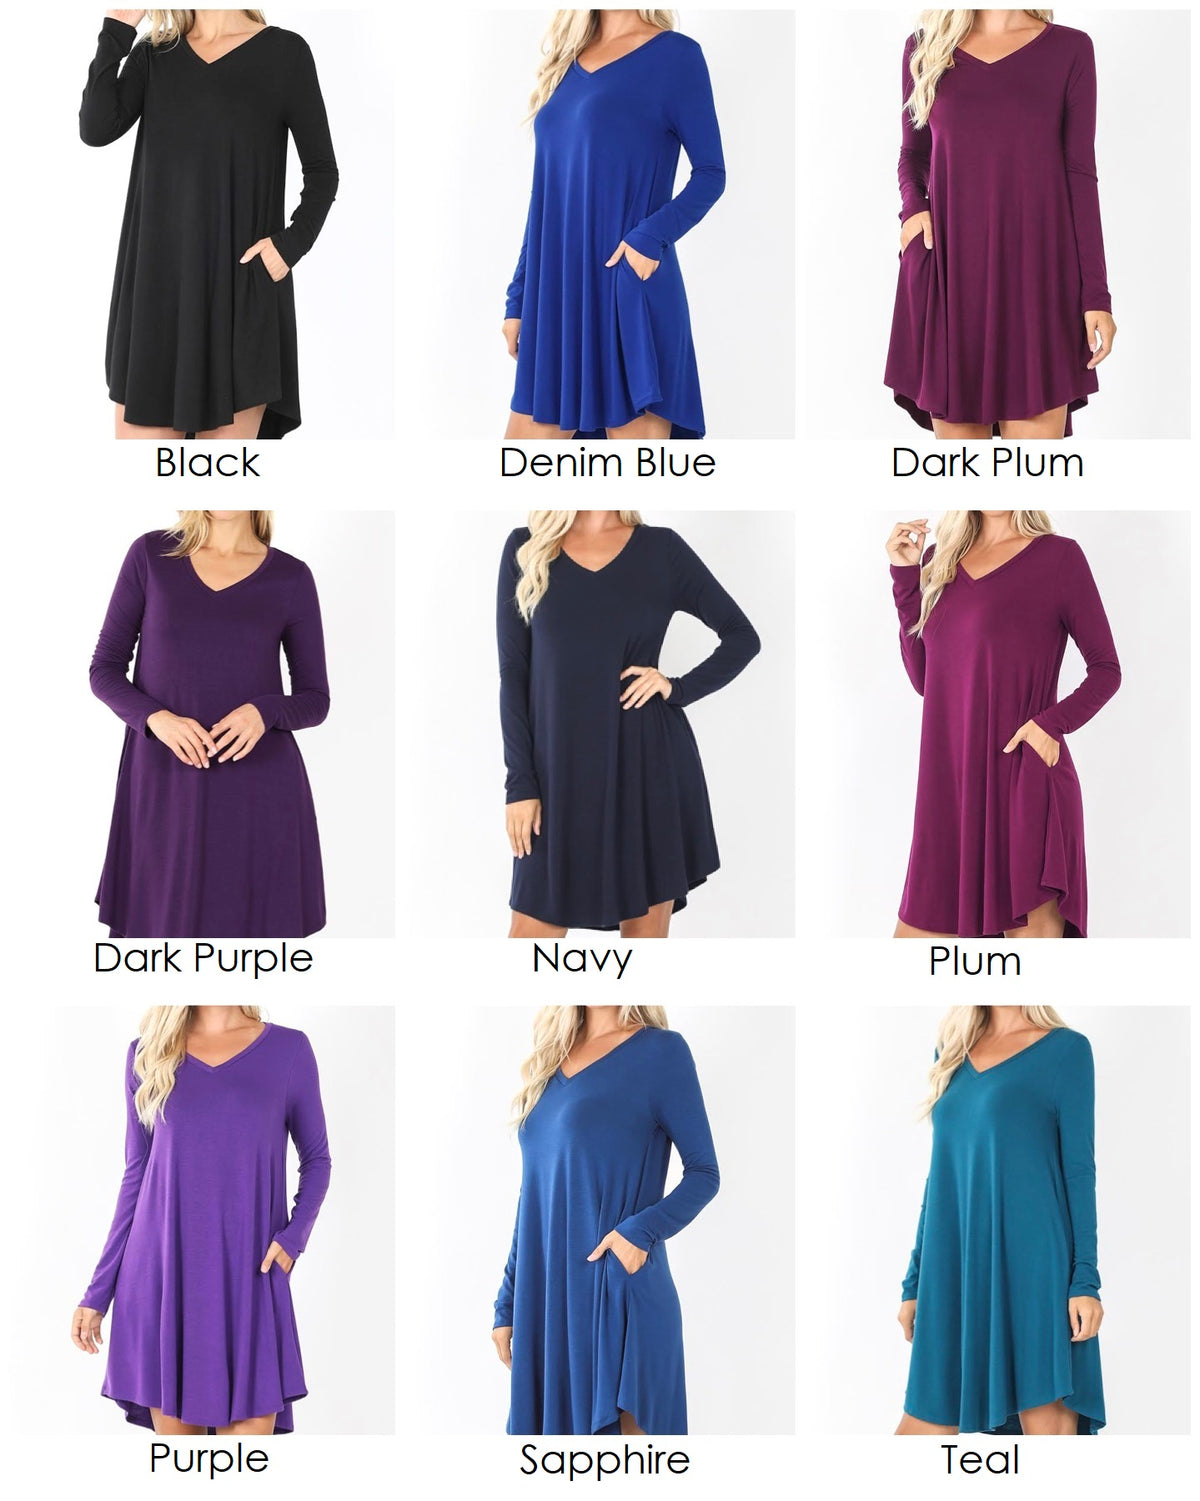 Linda Long Sleeve Womens Dress with Pockets v-neck rounded hemline available in 9 colors